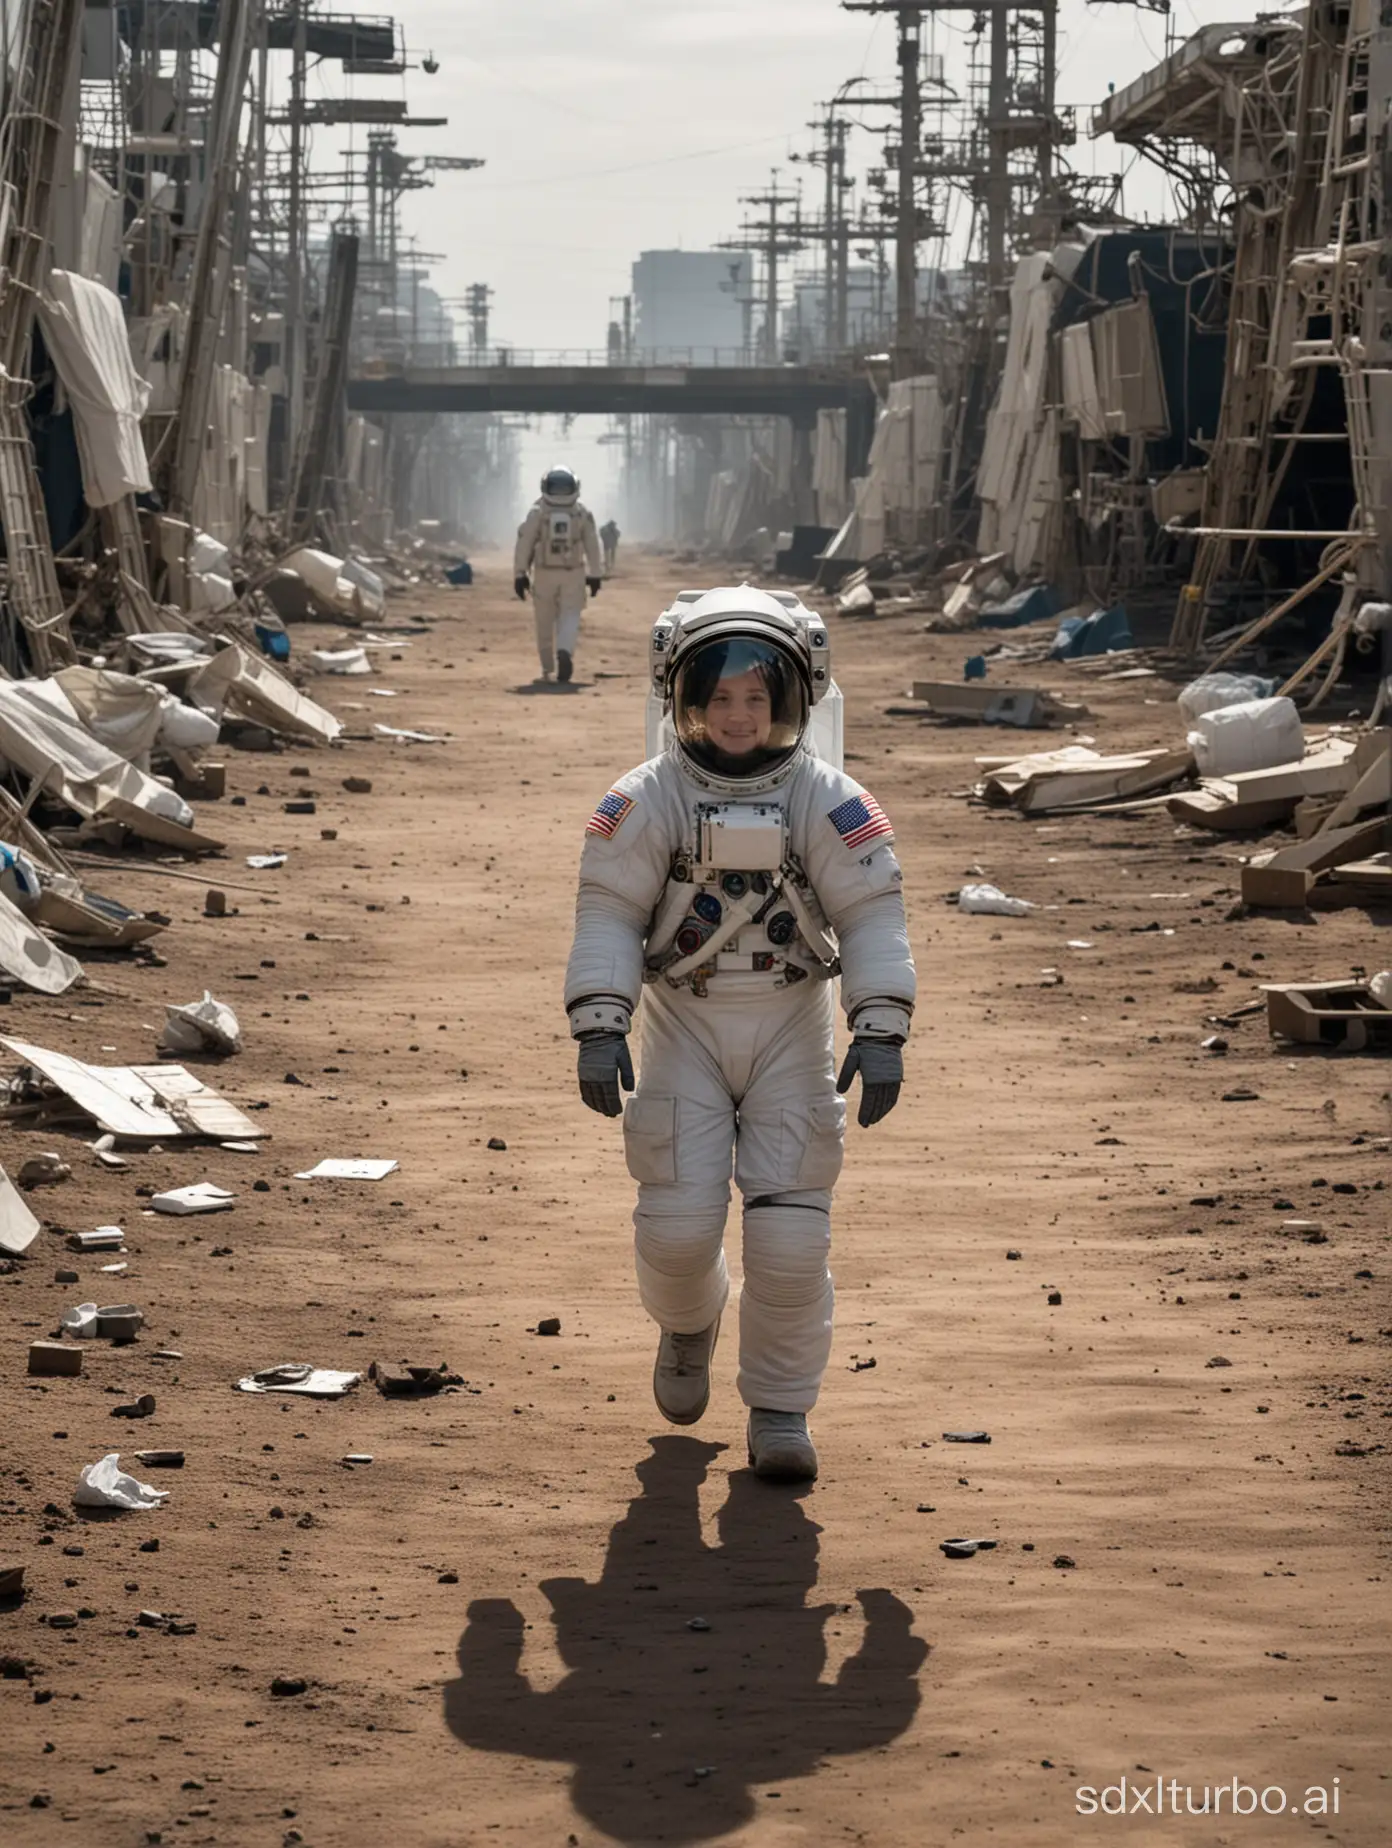 The 10-year-old astronaut wanders around the outskirts of the space station.